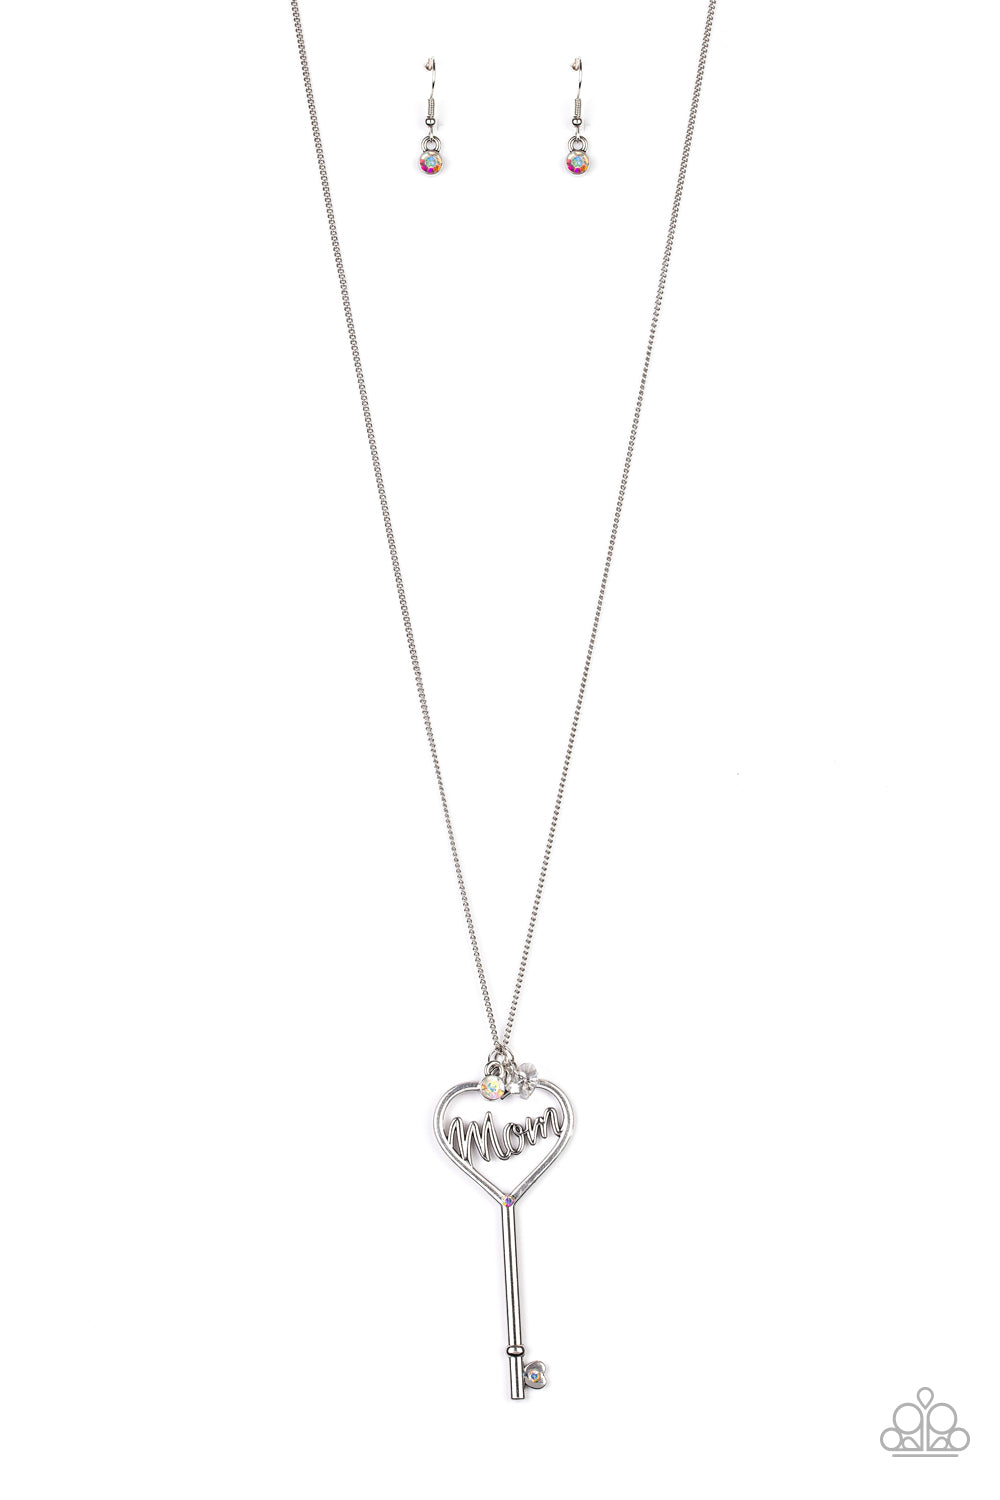 The Key To Mom's Heart Necklace__Multi